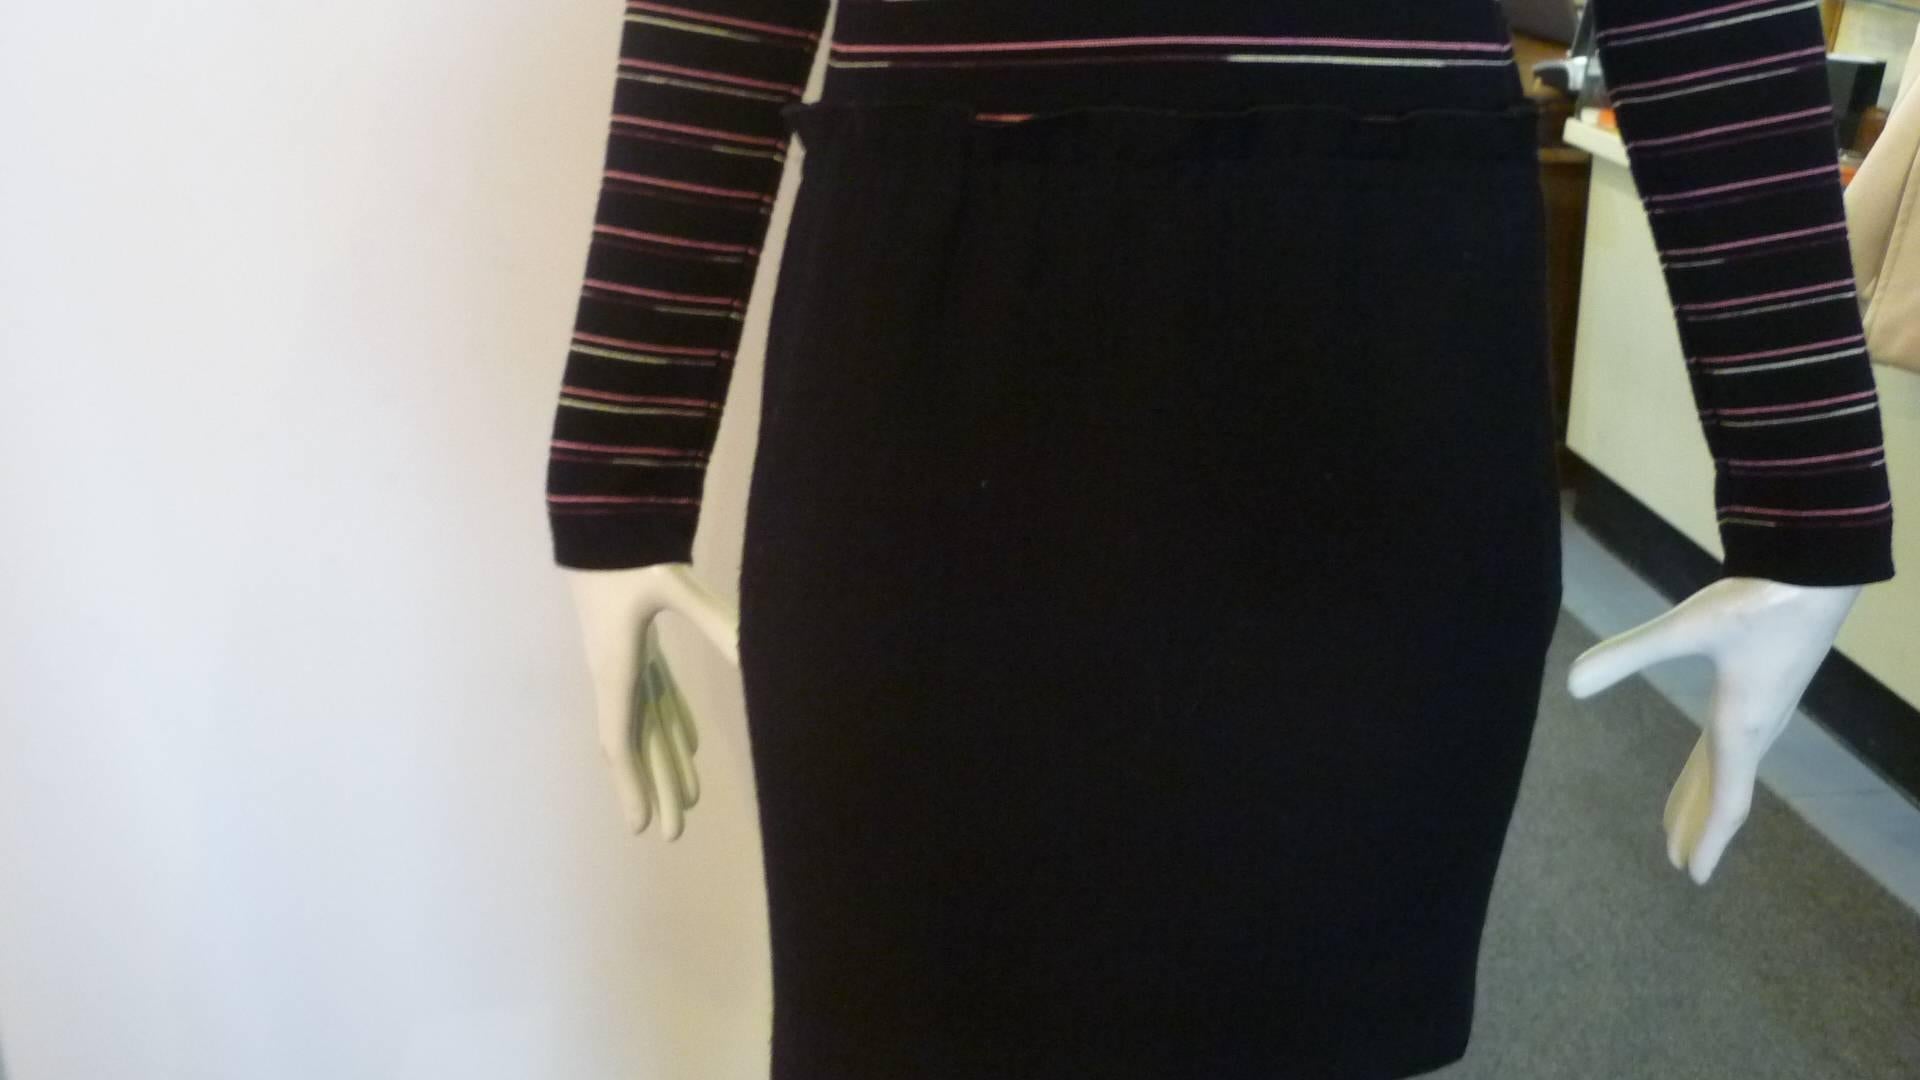 Horizontal striped top with a solid black skirt starting at the hip line with a soft gathered detail. The skirt has side slit pockets.

Zip closure at the side.